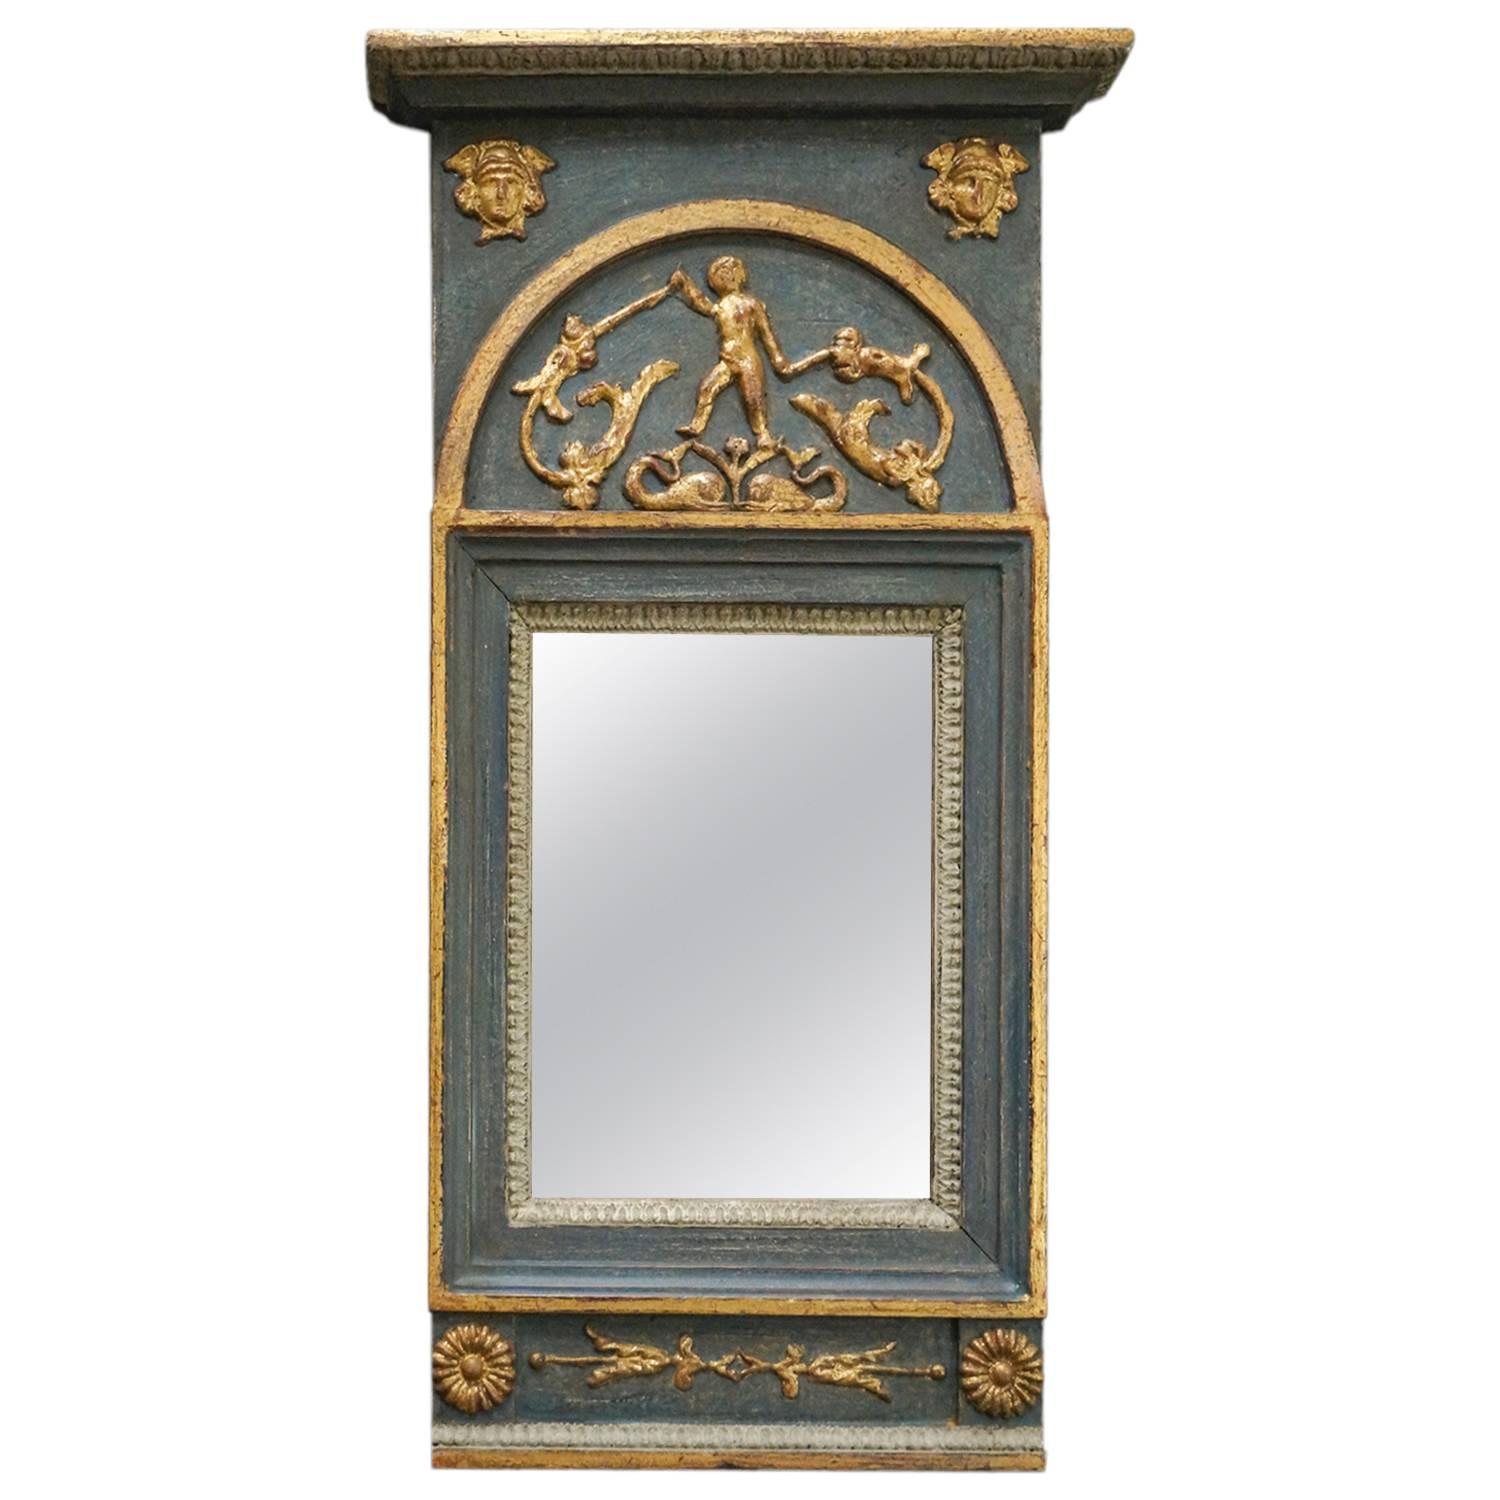 Period Neoclassical Mirror with Mythological Figures For Sale